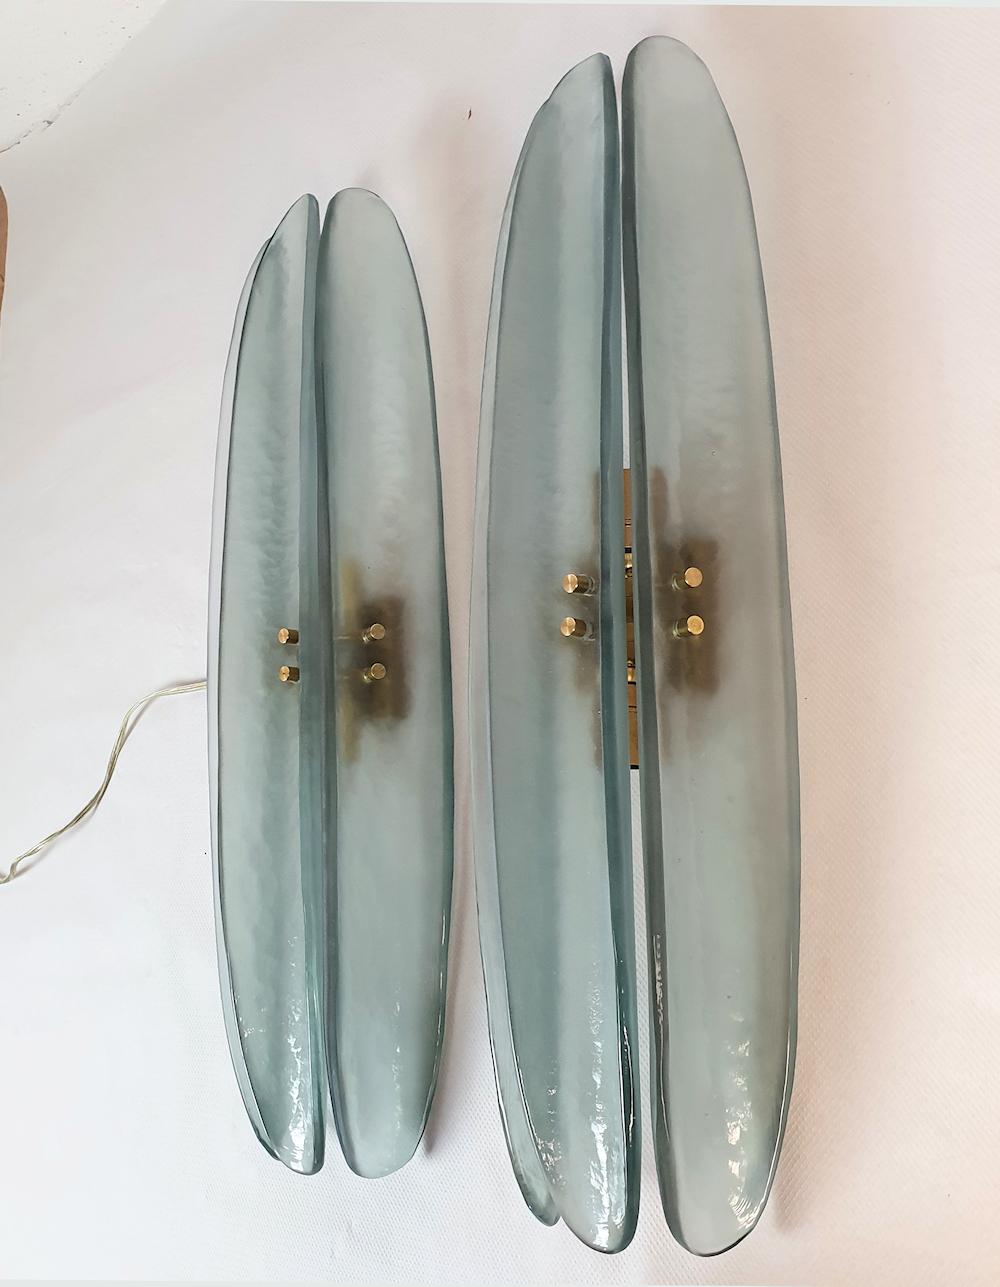 Mid-Century Modern pair of Murano glass wall sconces, attributed to Mazzega, Italy 1980s.
The vintage sconces are made of 3 long and curved tiles in Murano glass, in a beautiful semi-transparent blue/green color.
The sconces have 2 lights each and